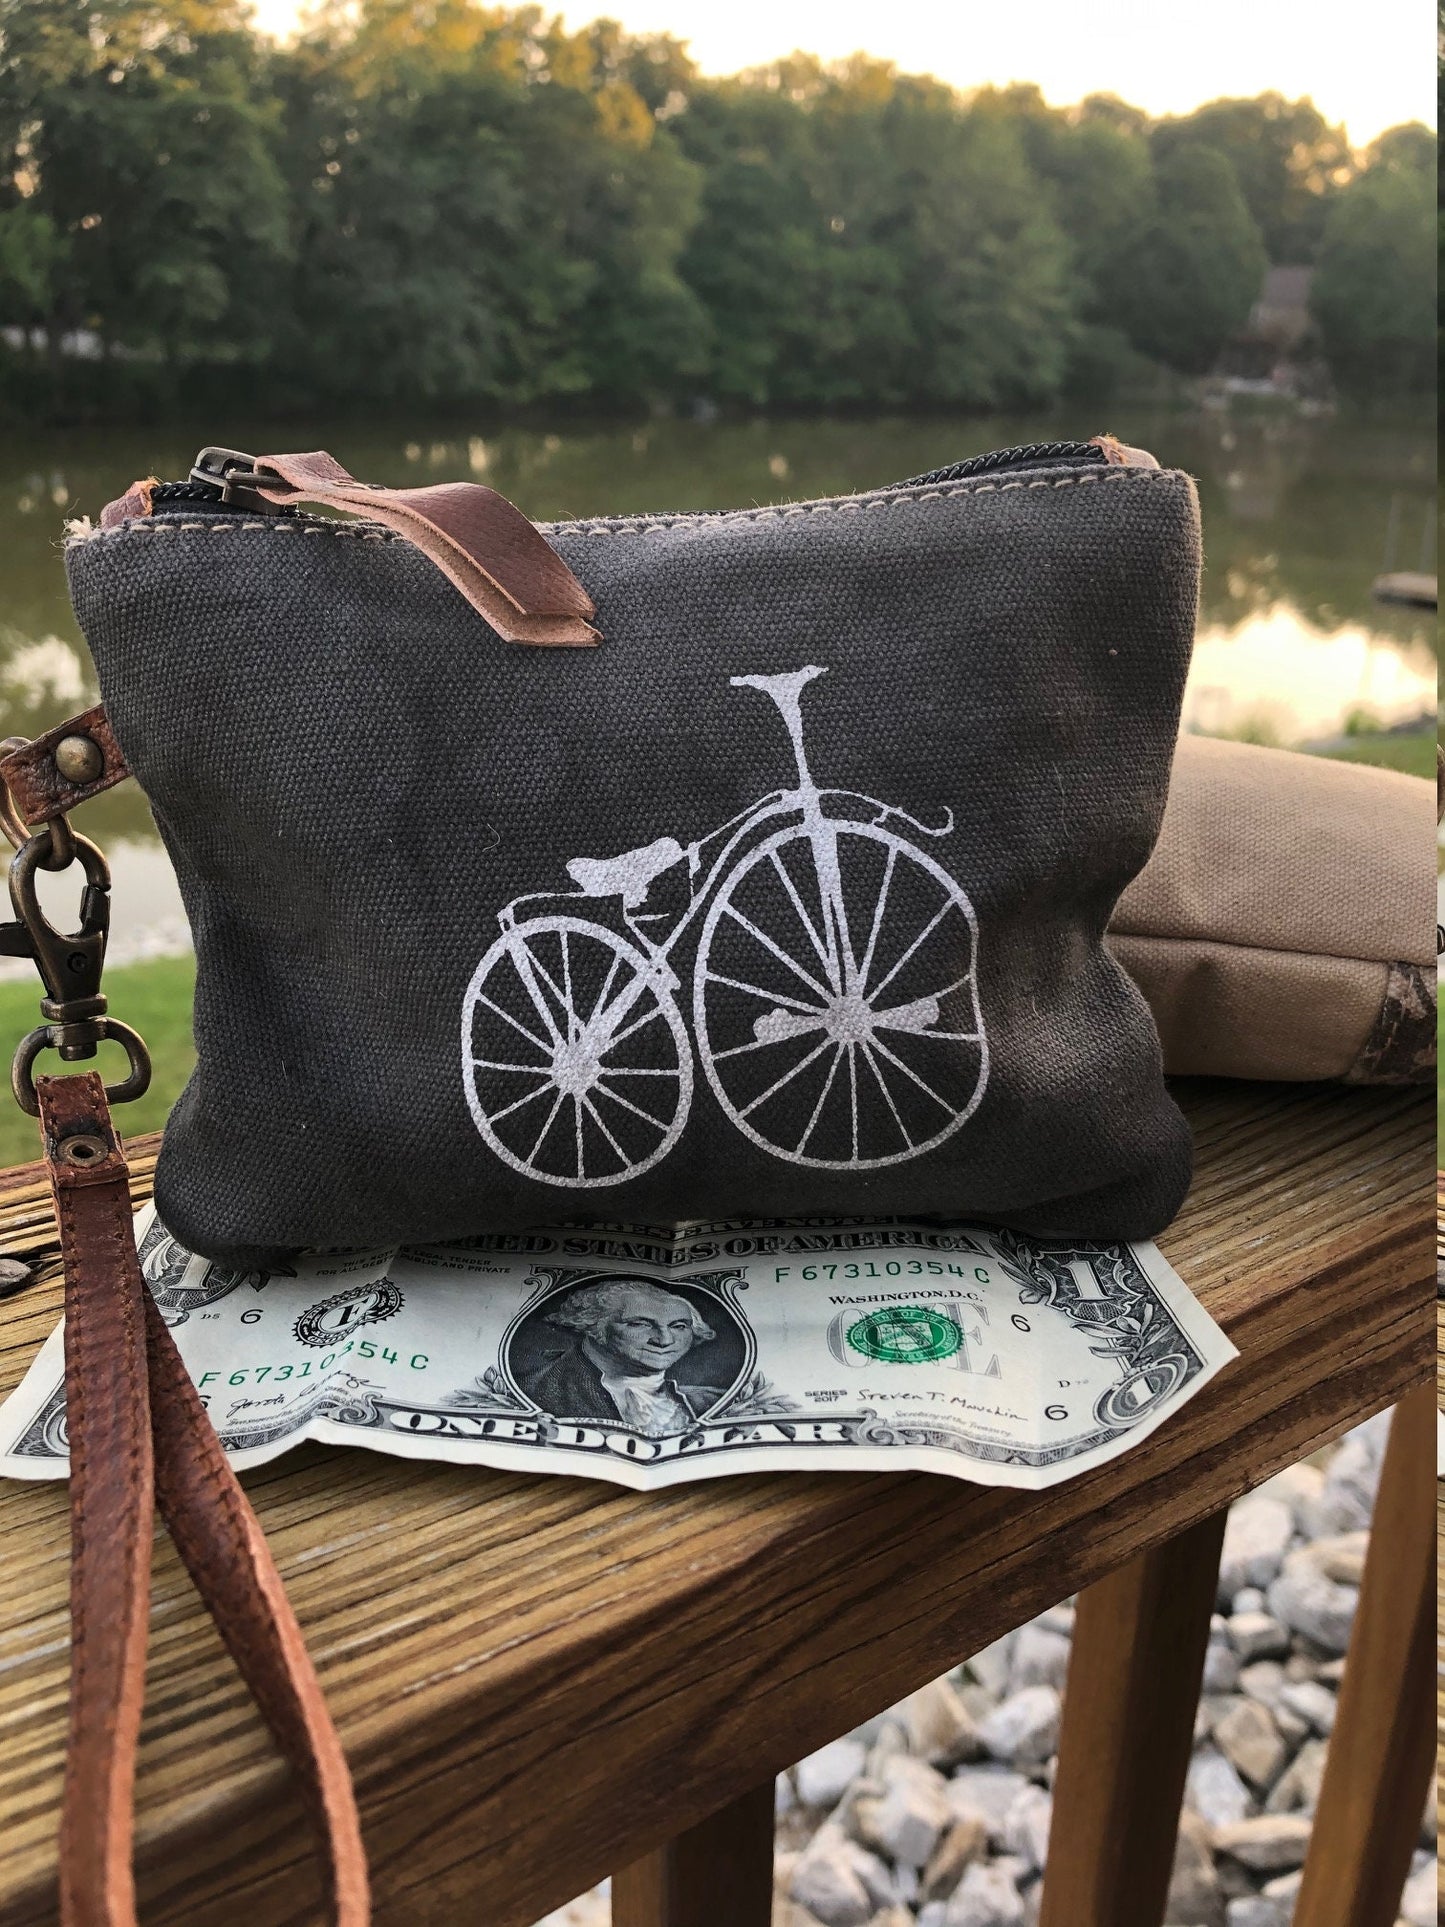 Upcycled Bicycle Sustainable Canvas Bag Coin Purse  - Small Wristlet or Make Up Bag